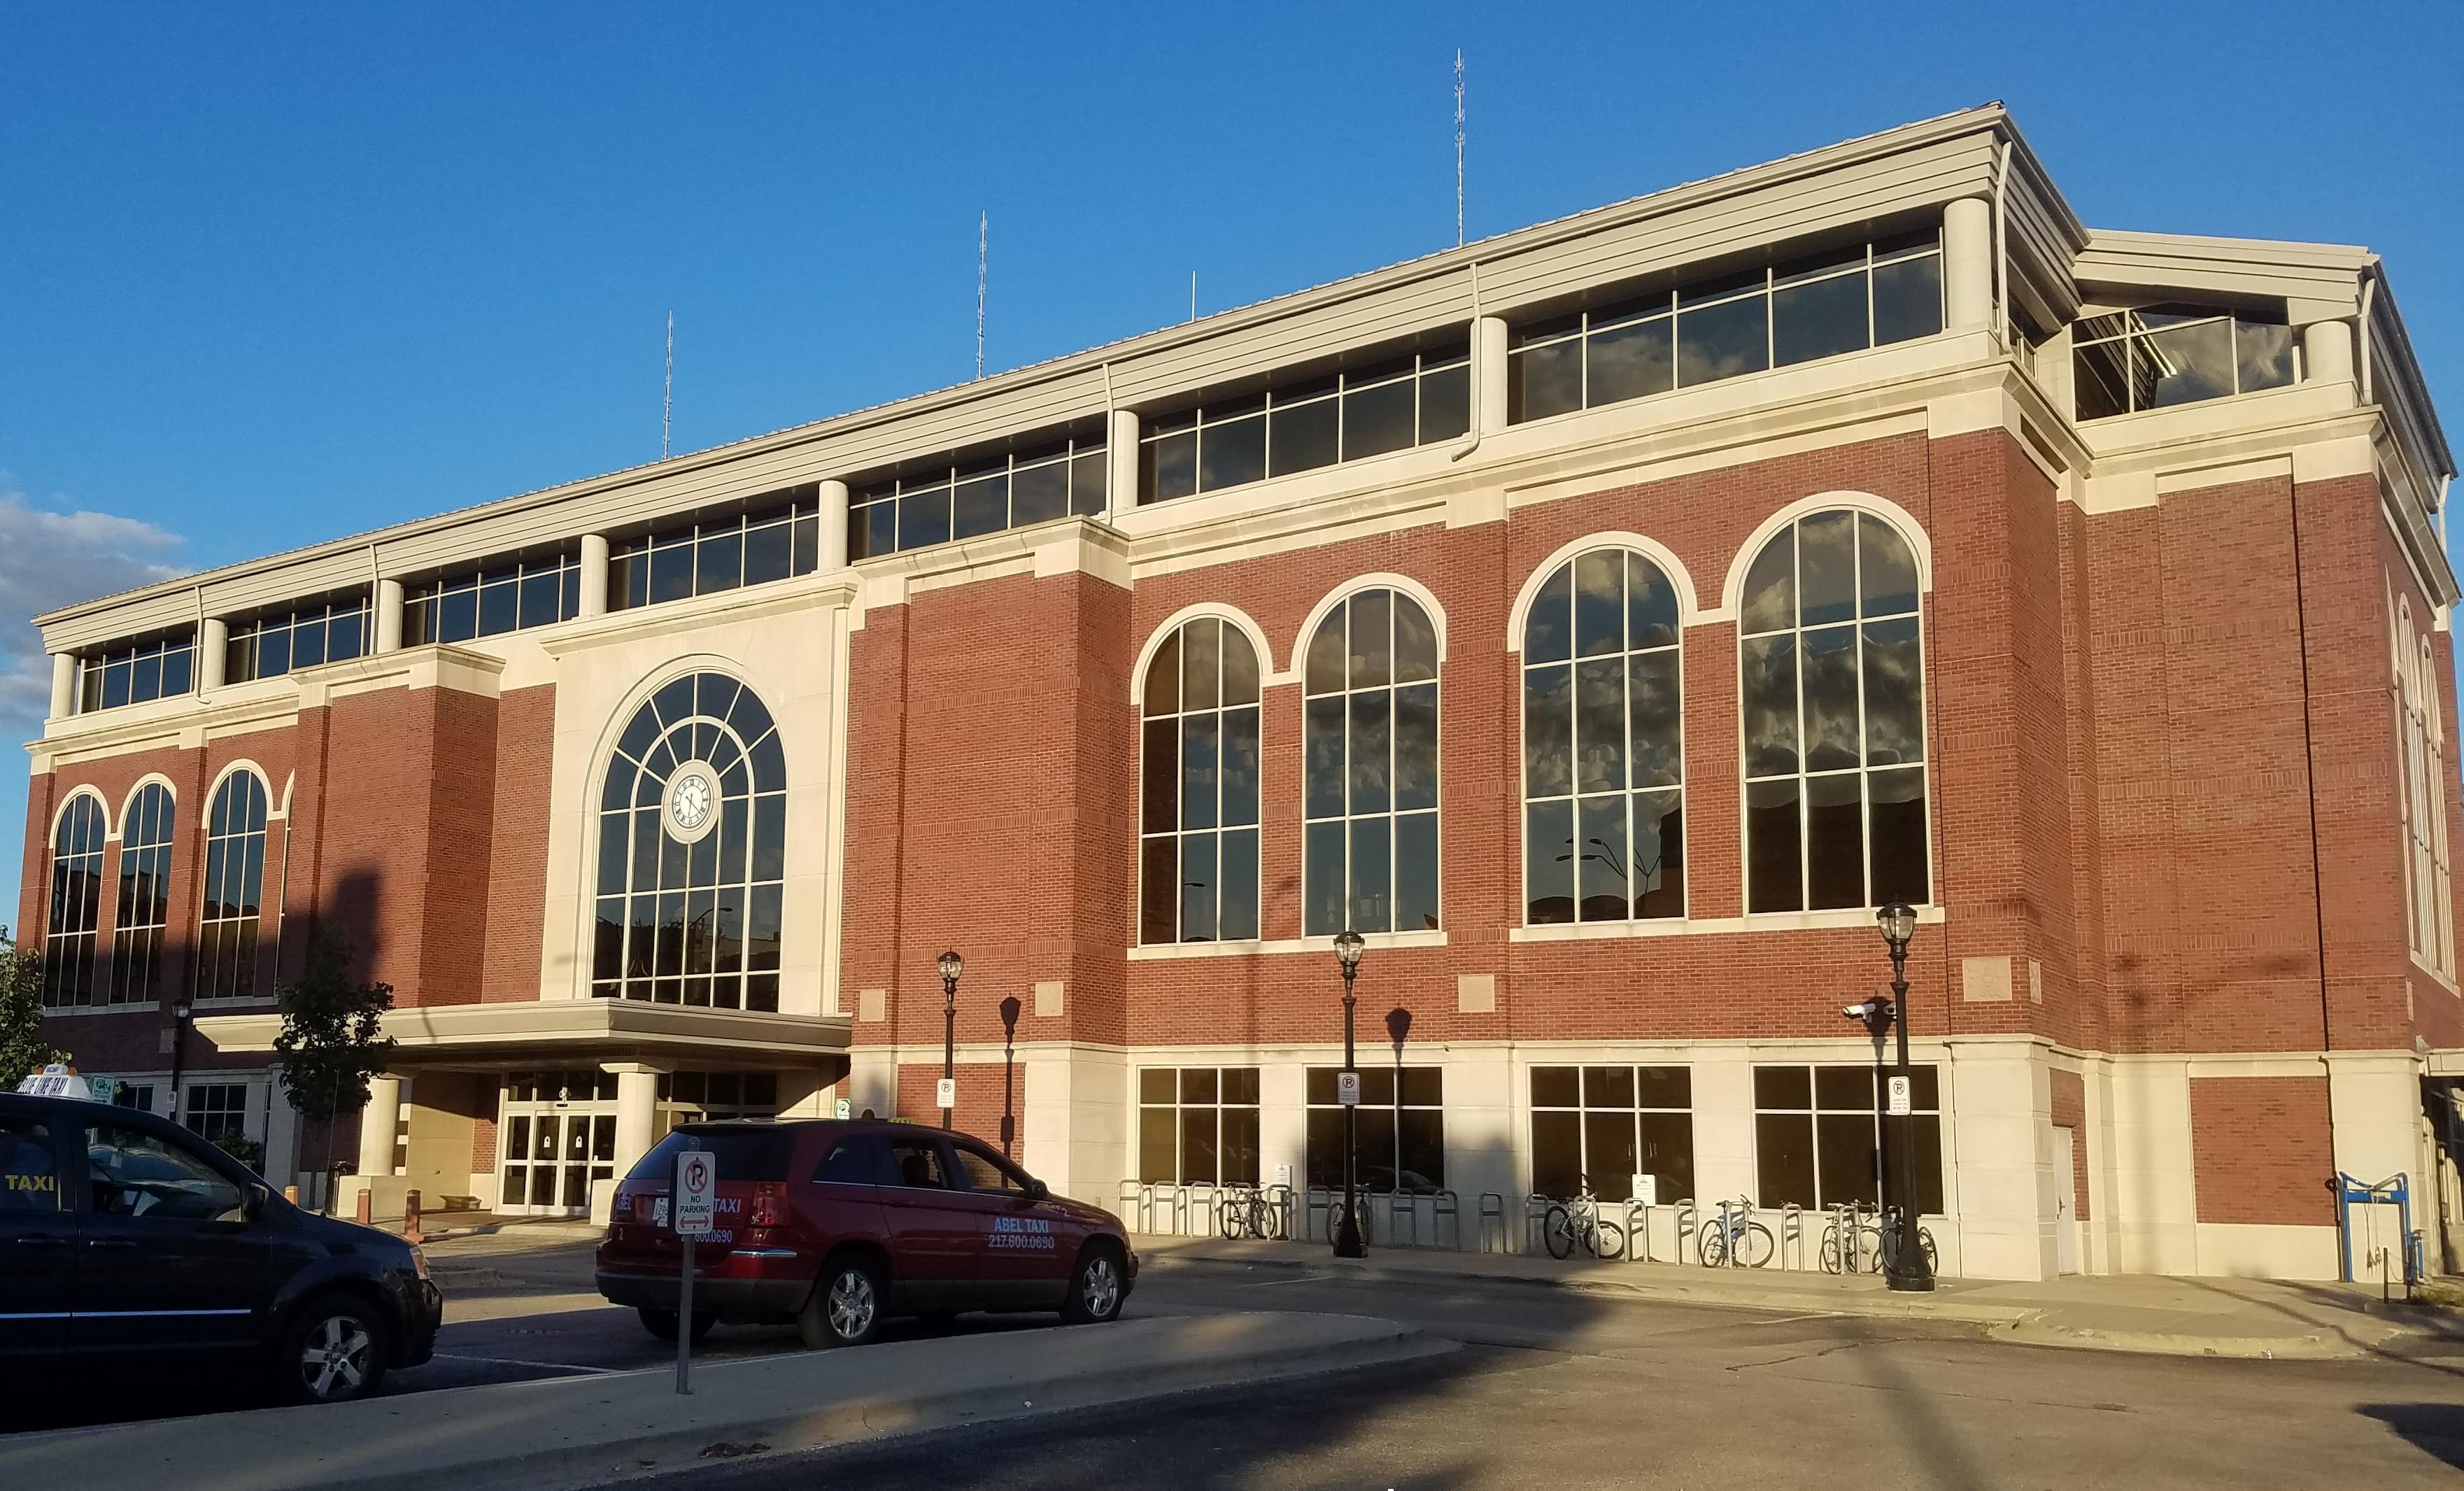 The Illinois Terminal building in downtown Chamaign.